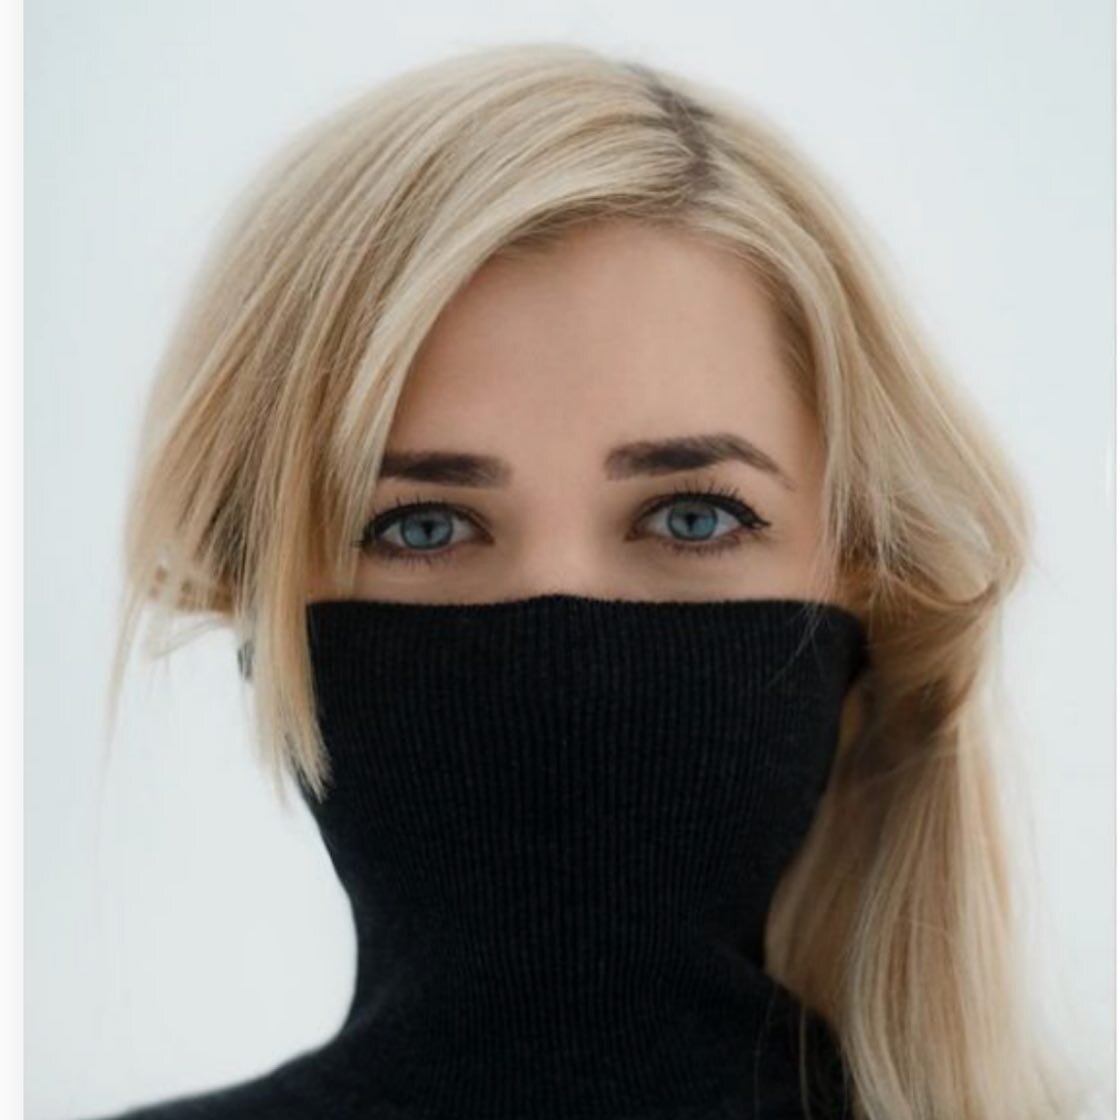 Who&rsquo;s ready to go out there and brave the cold?! #winter #haircare #selfcare #hair #salon #boston #bostonsalon #newburystboston #cynthiaksalon #winterhair #beautysleep #blonde #winterblonde #brunette #winterbrunette